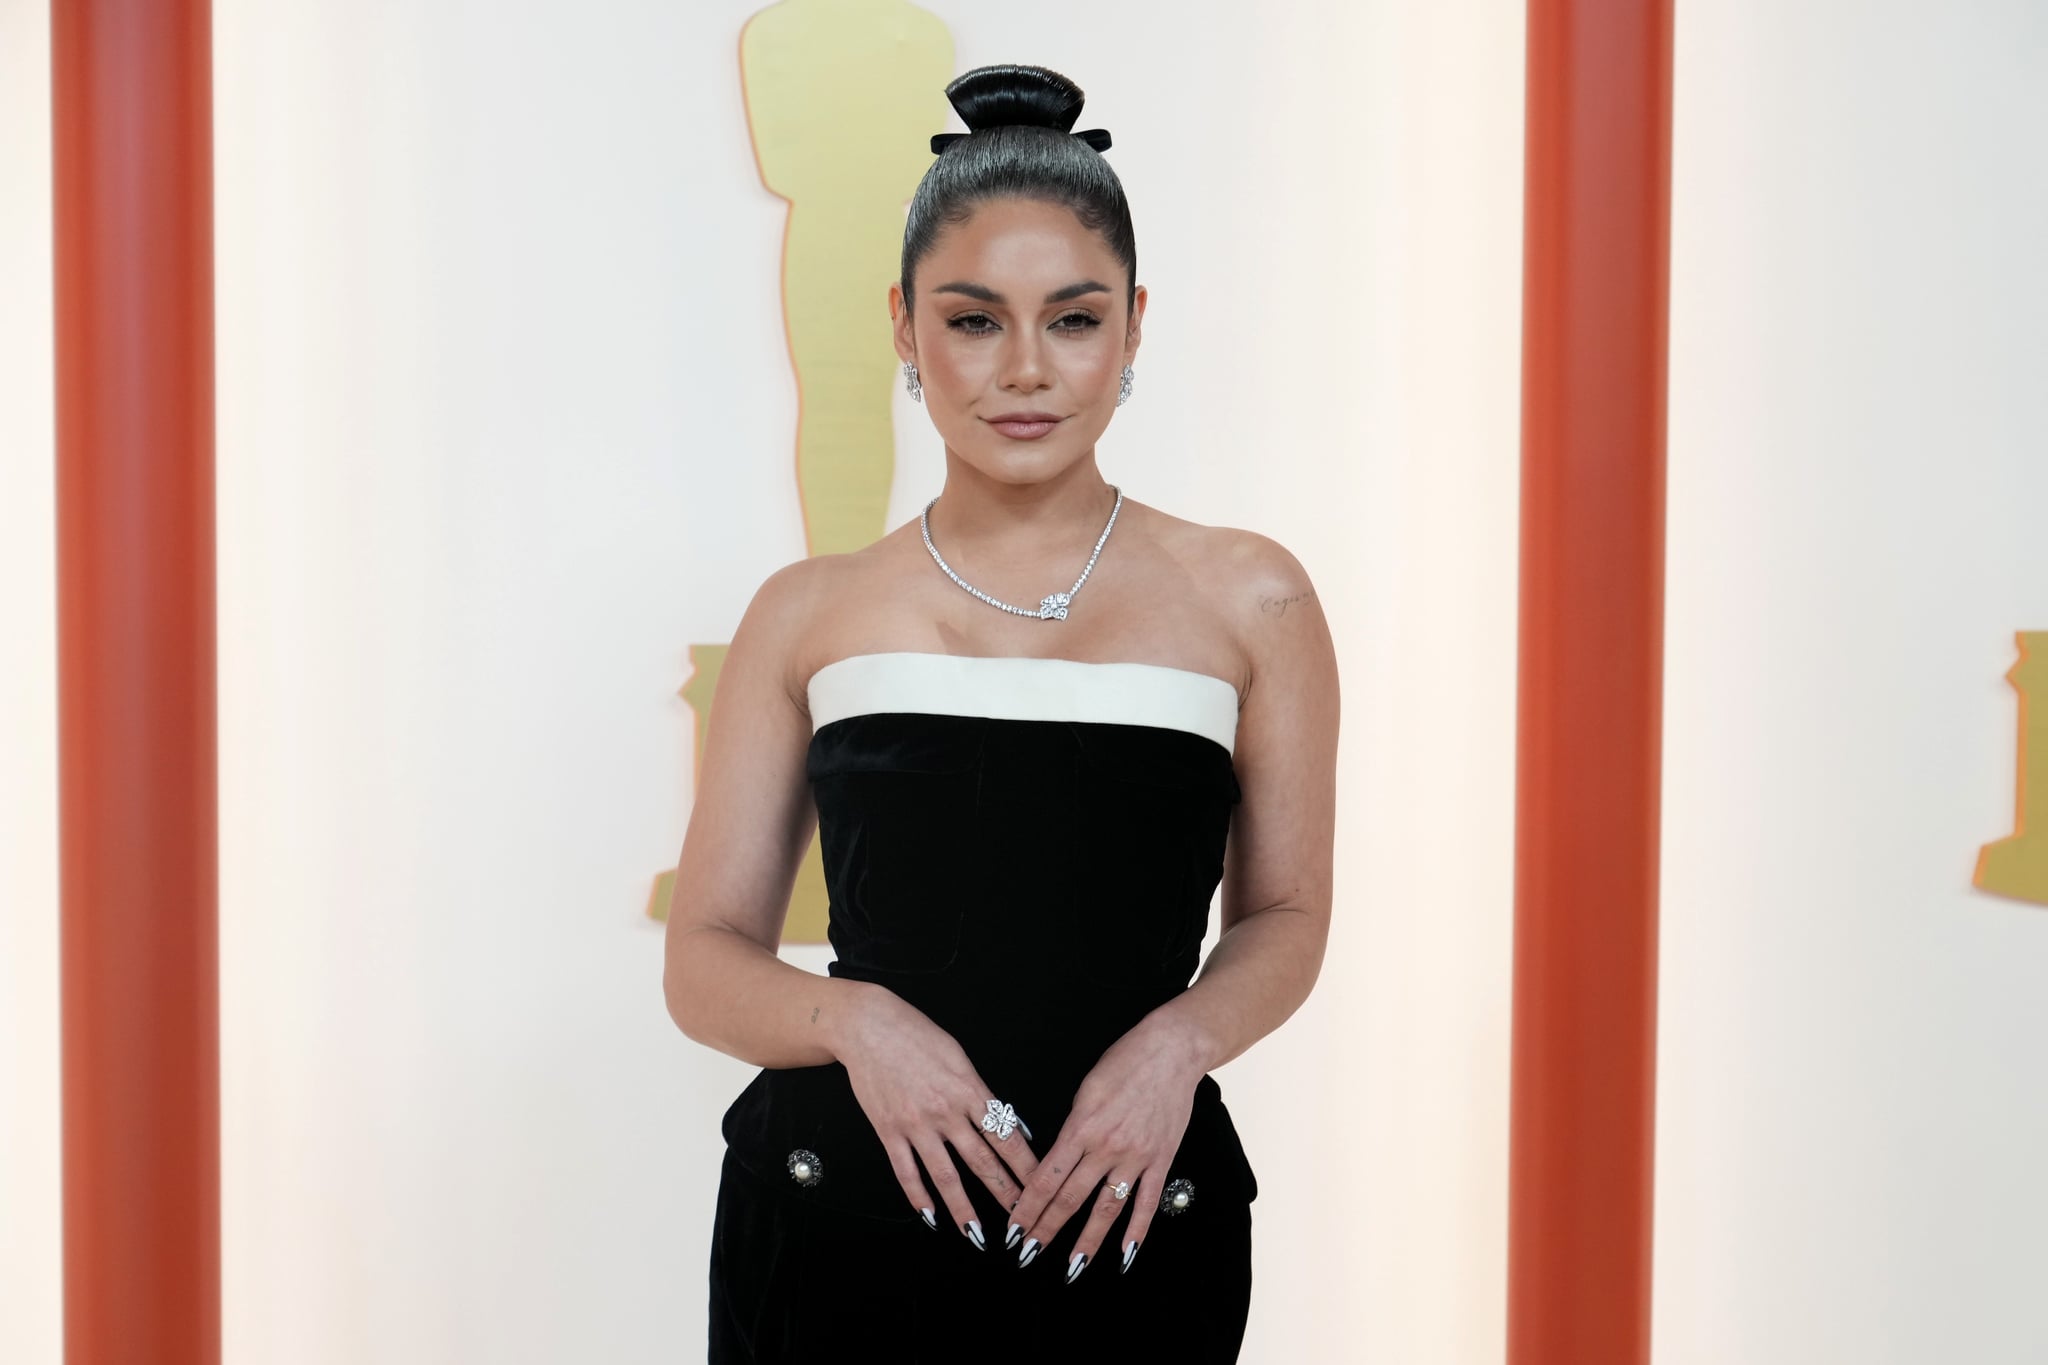 HOLLYWOOD, CALIFORNIA - MARCH 12: Vanessa Hudgens attends the 95th Annual Academy Awards on March 12, 2023 in Hollywood, California. (Photo by Jeff Kravitz/FilmMagic)